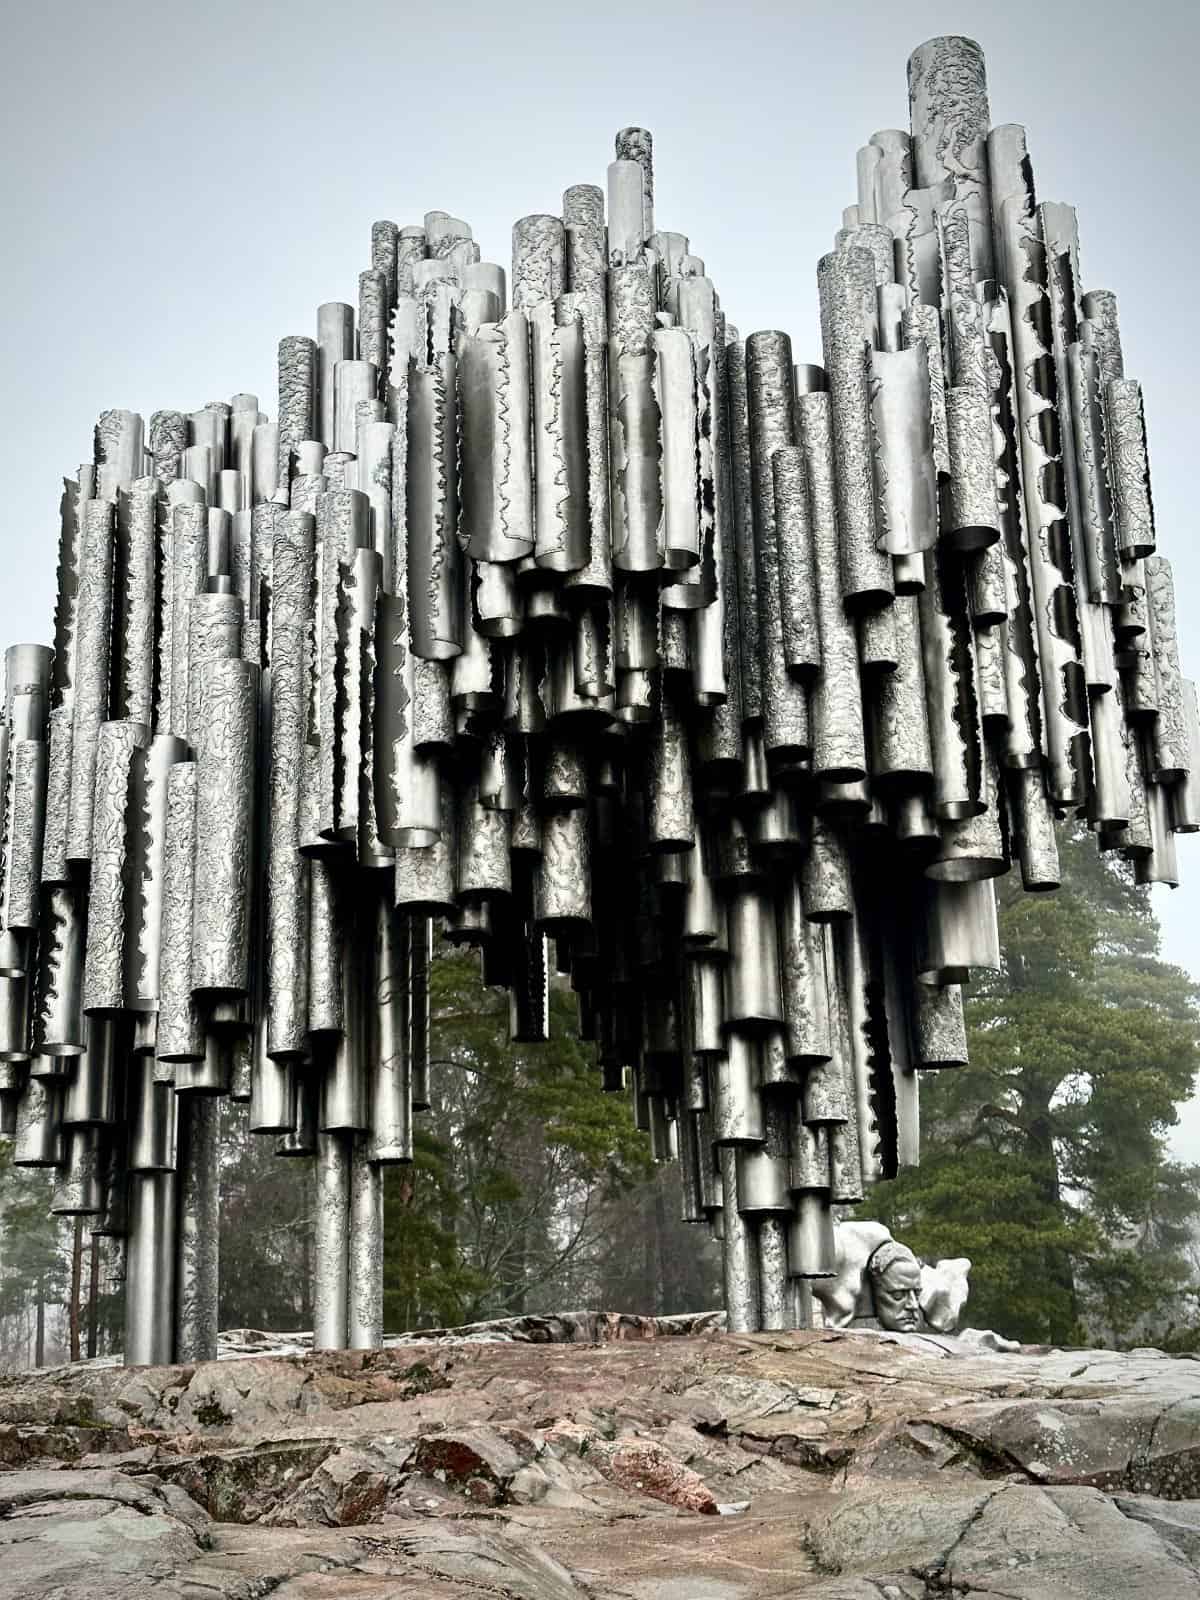 A Helsinki itinerary for winter - the Sebelius Monument is worth a visit